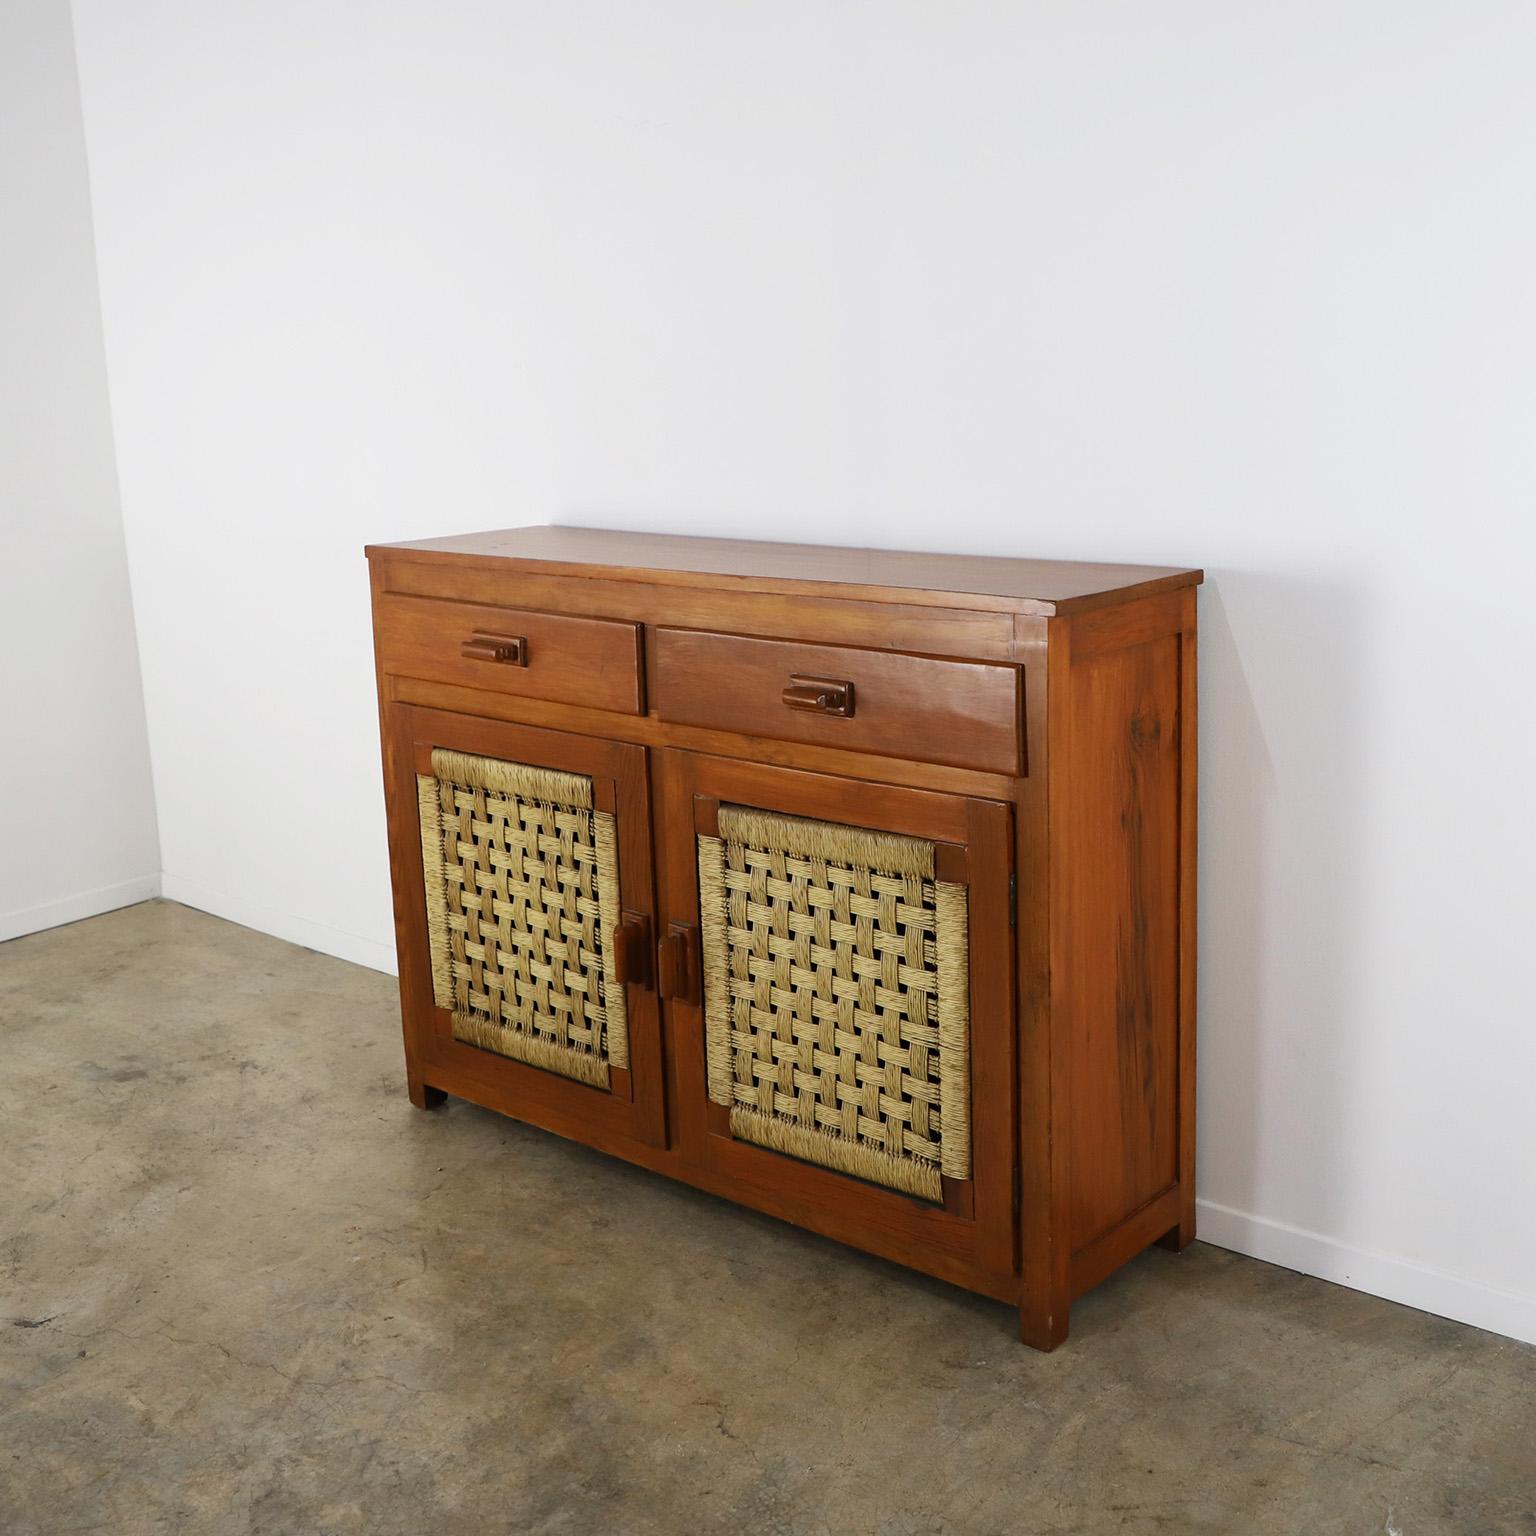 We offer this midcentury Credenza in the style of Clara Porset made in solid pine wood and palm cords, circa 1960. Excellent vintage condition, palm is all original and the wood has been professionally refinished.